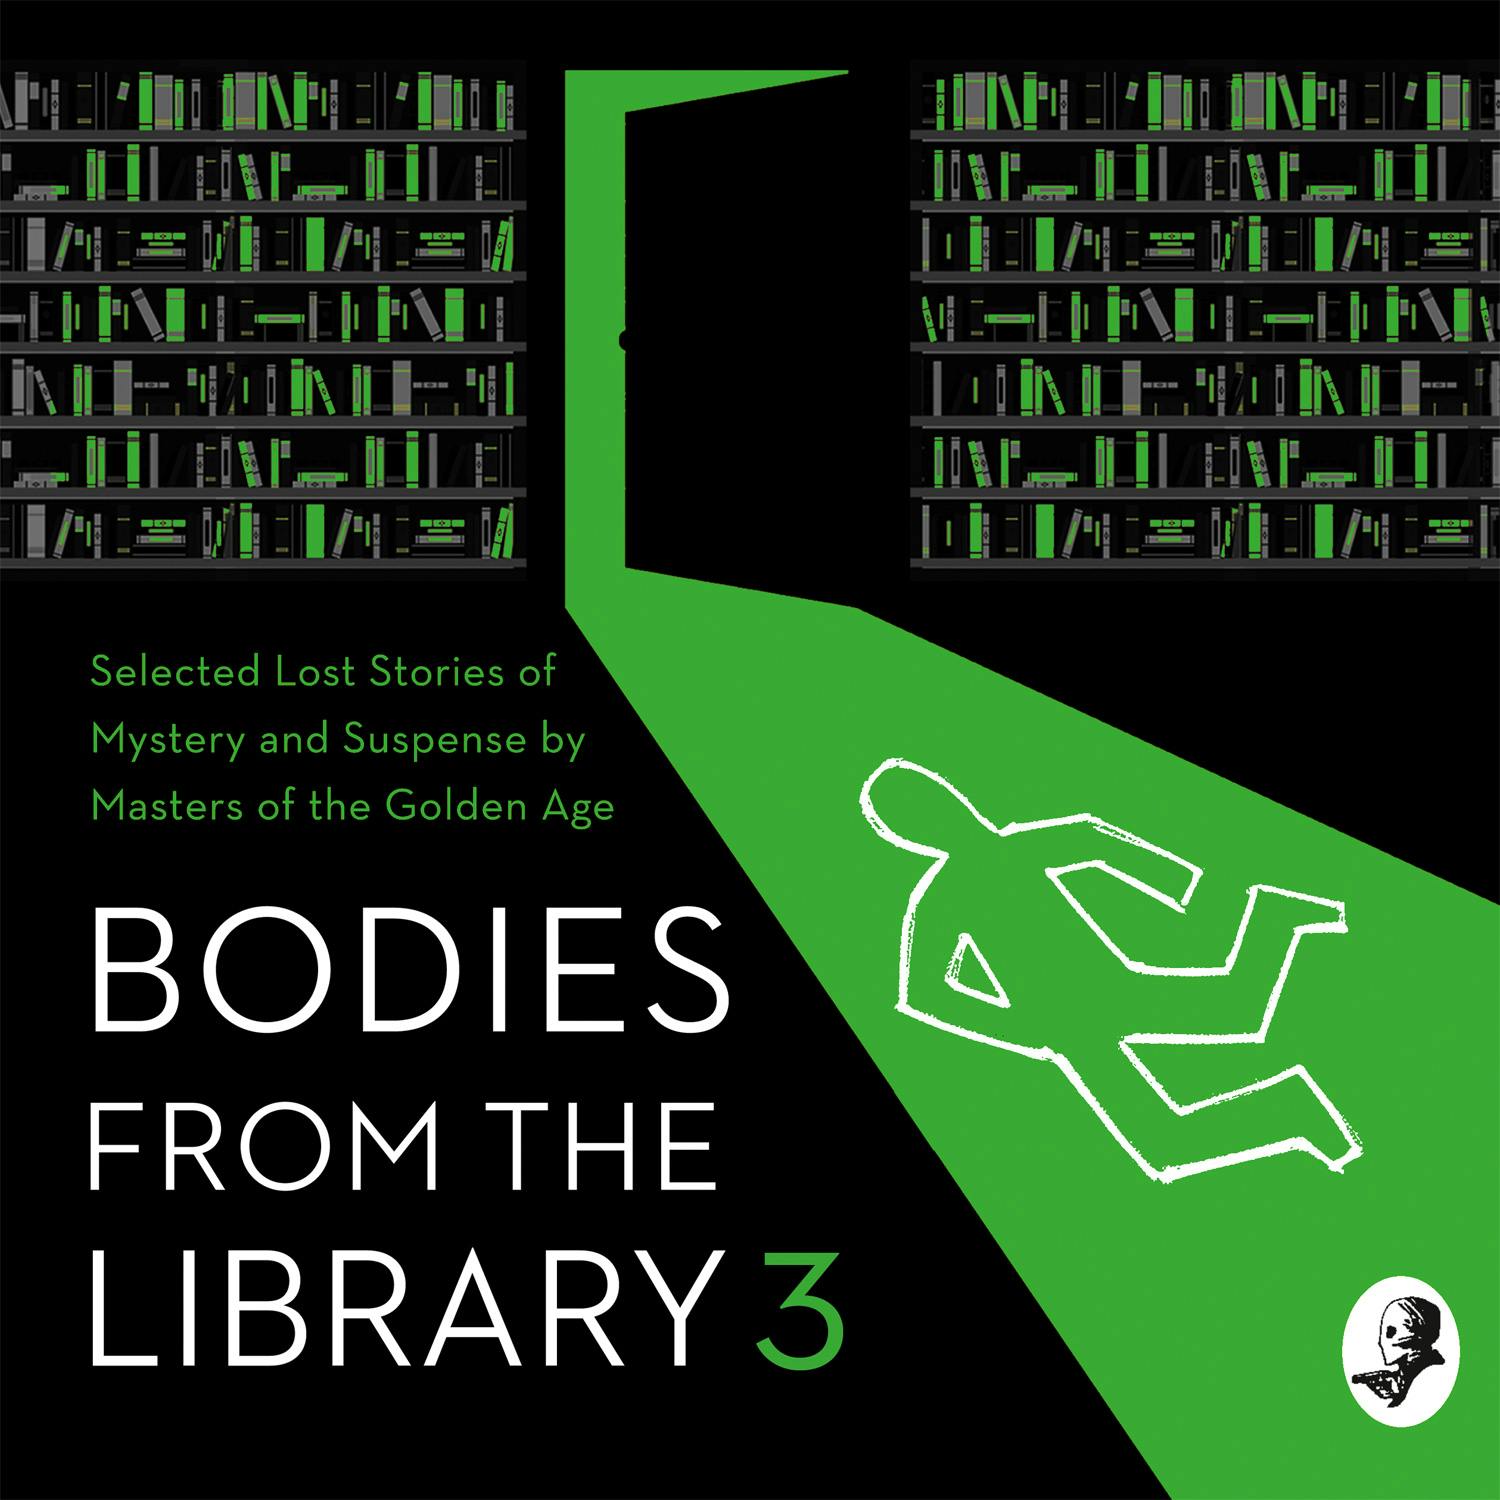 Bodies from the Library 3 - Nicholas Blake, Anthony Berkeley, Dorothy L. Sayers, Agatha Christie